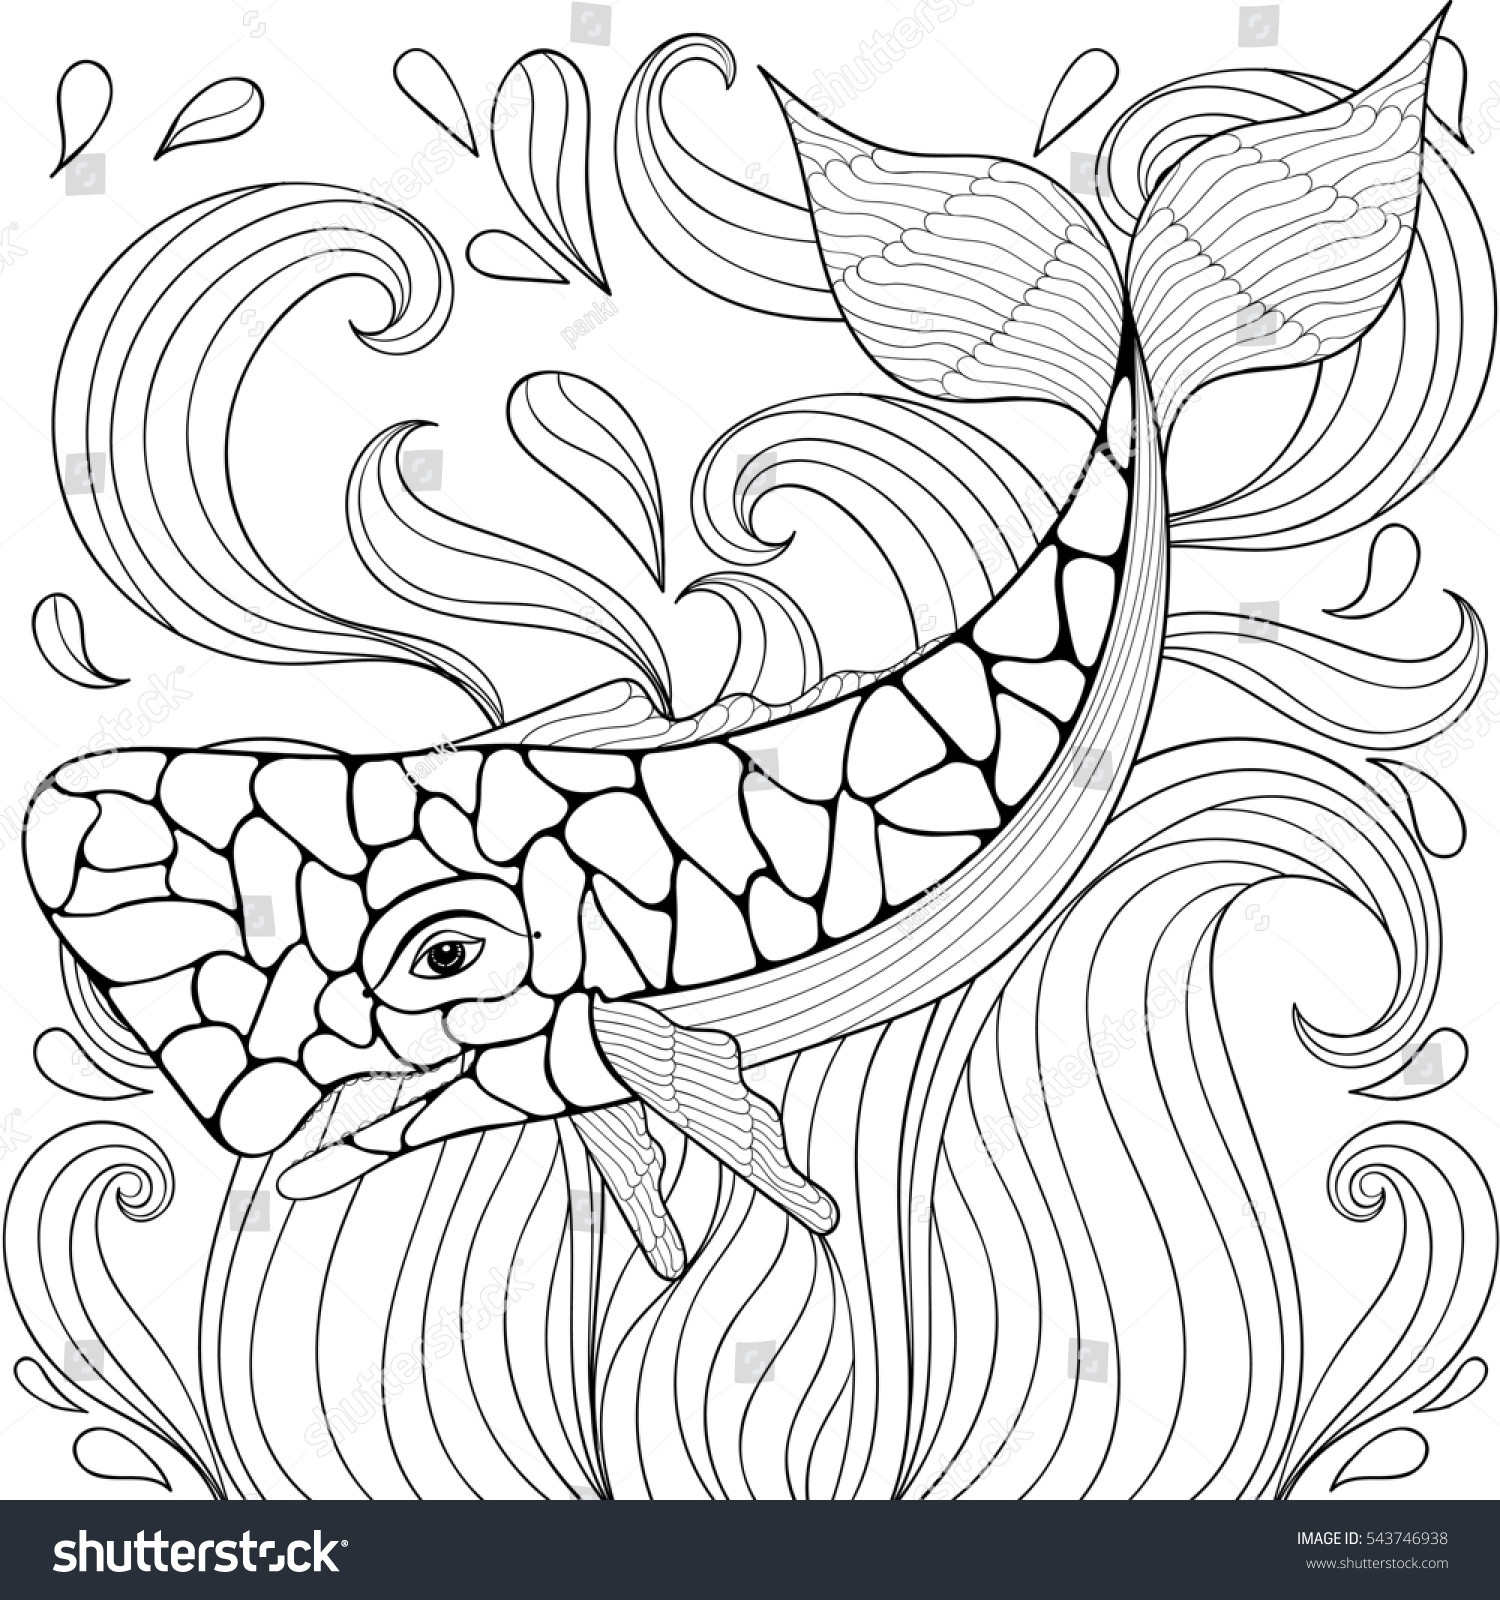 Ocean Waves Coloring Pages For Adults
 Zentangle Whale Waves Freehand Sketch Adult Stock